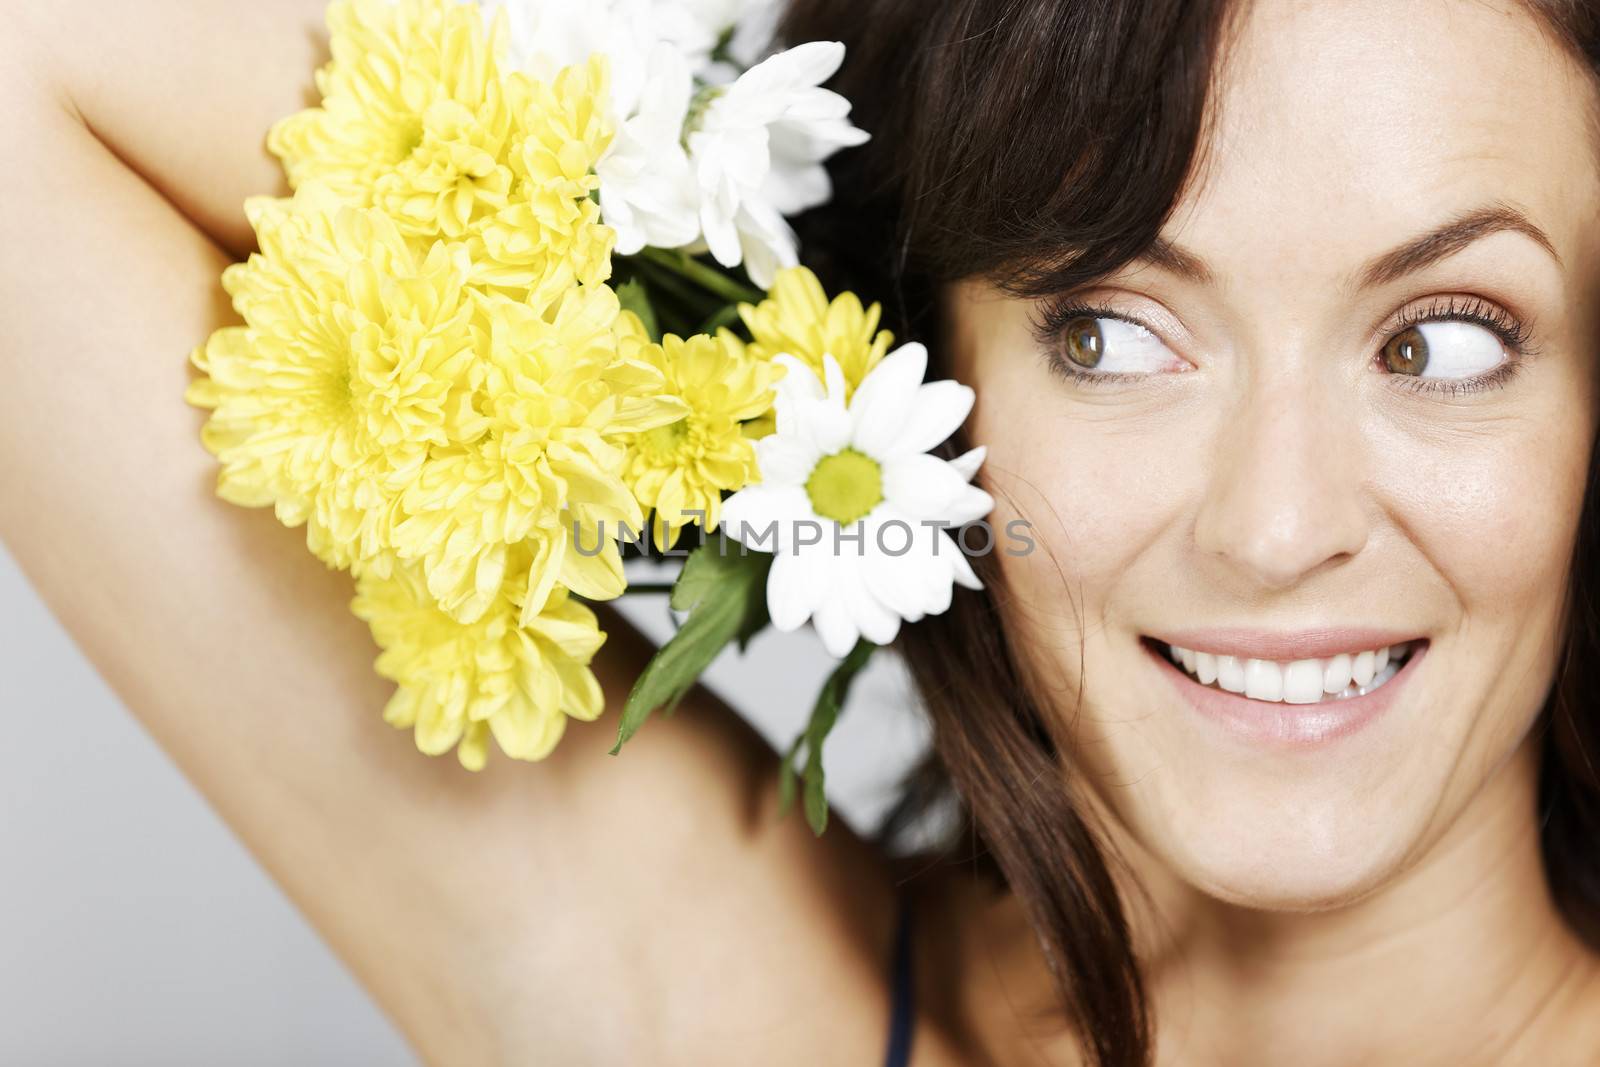 Woman holding flowers next to her head.